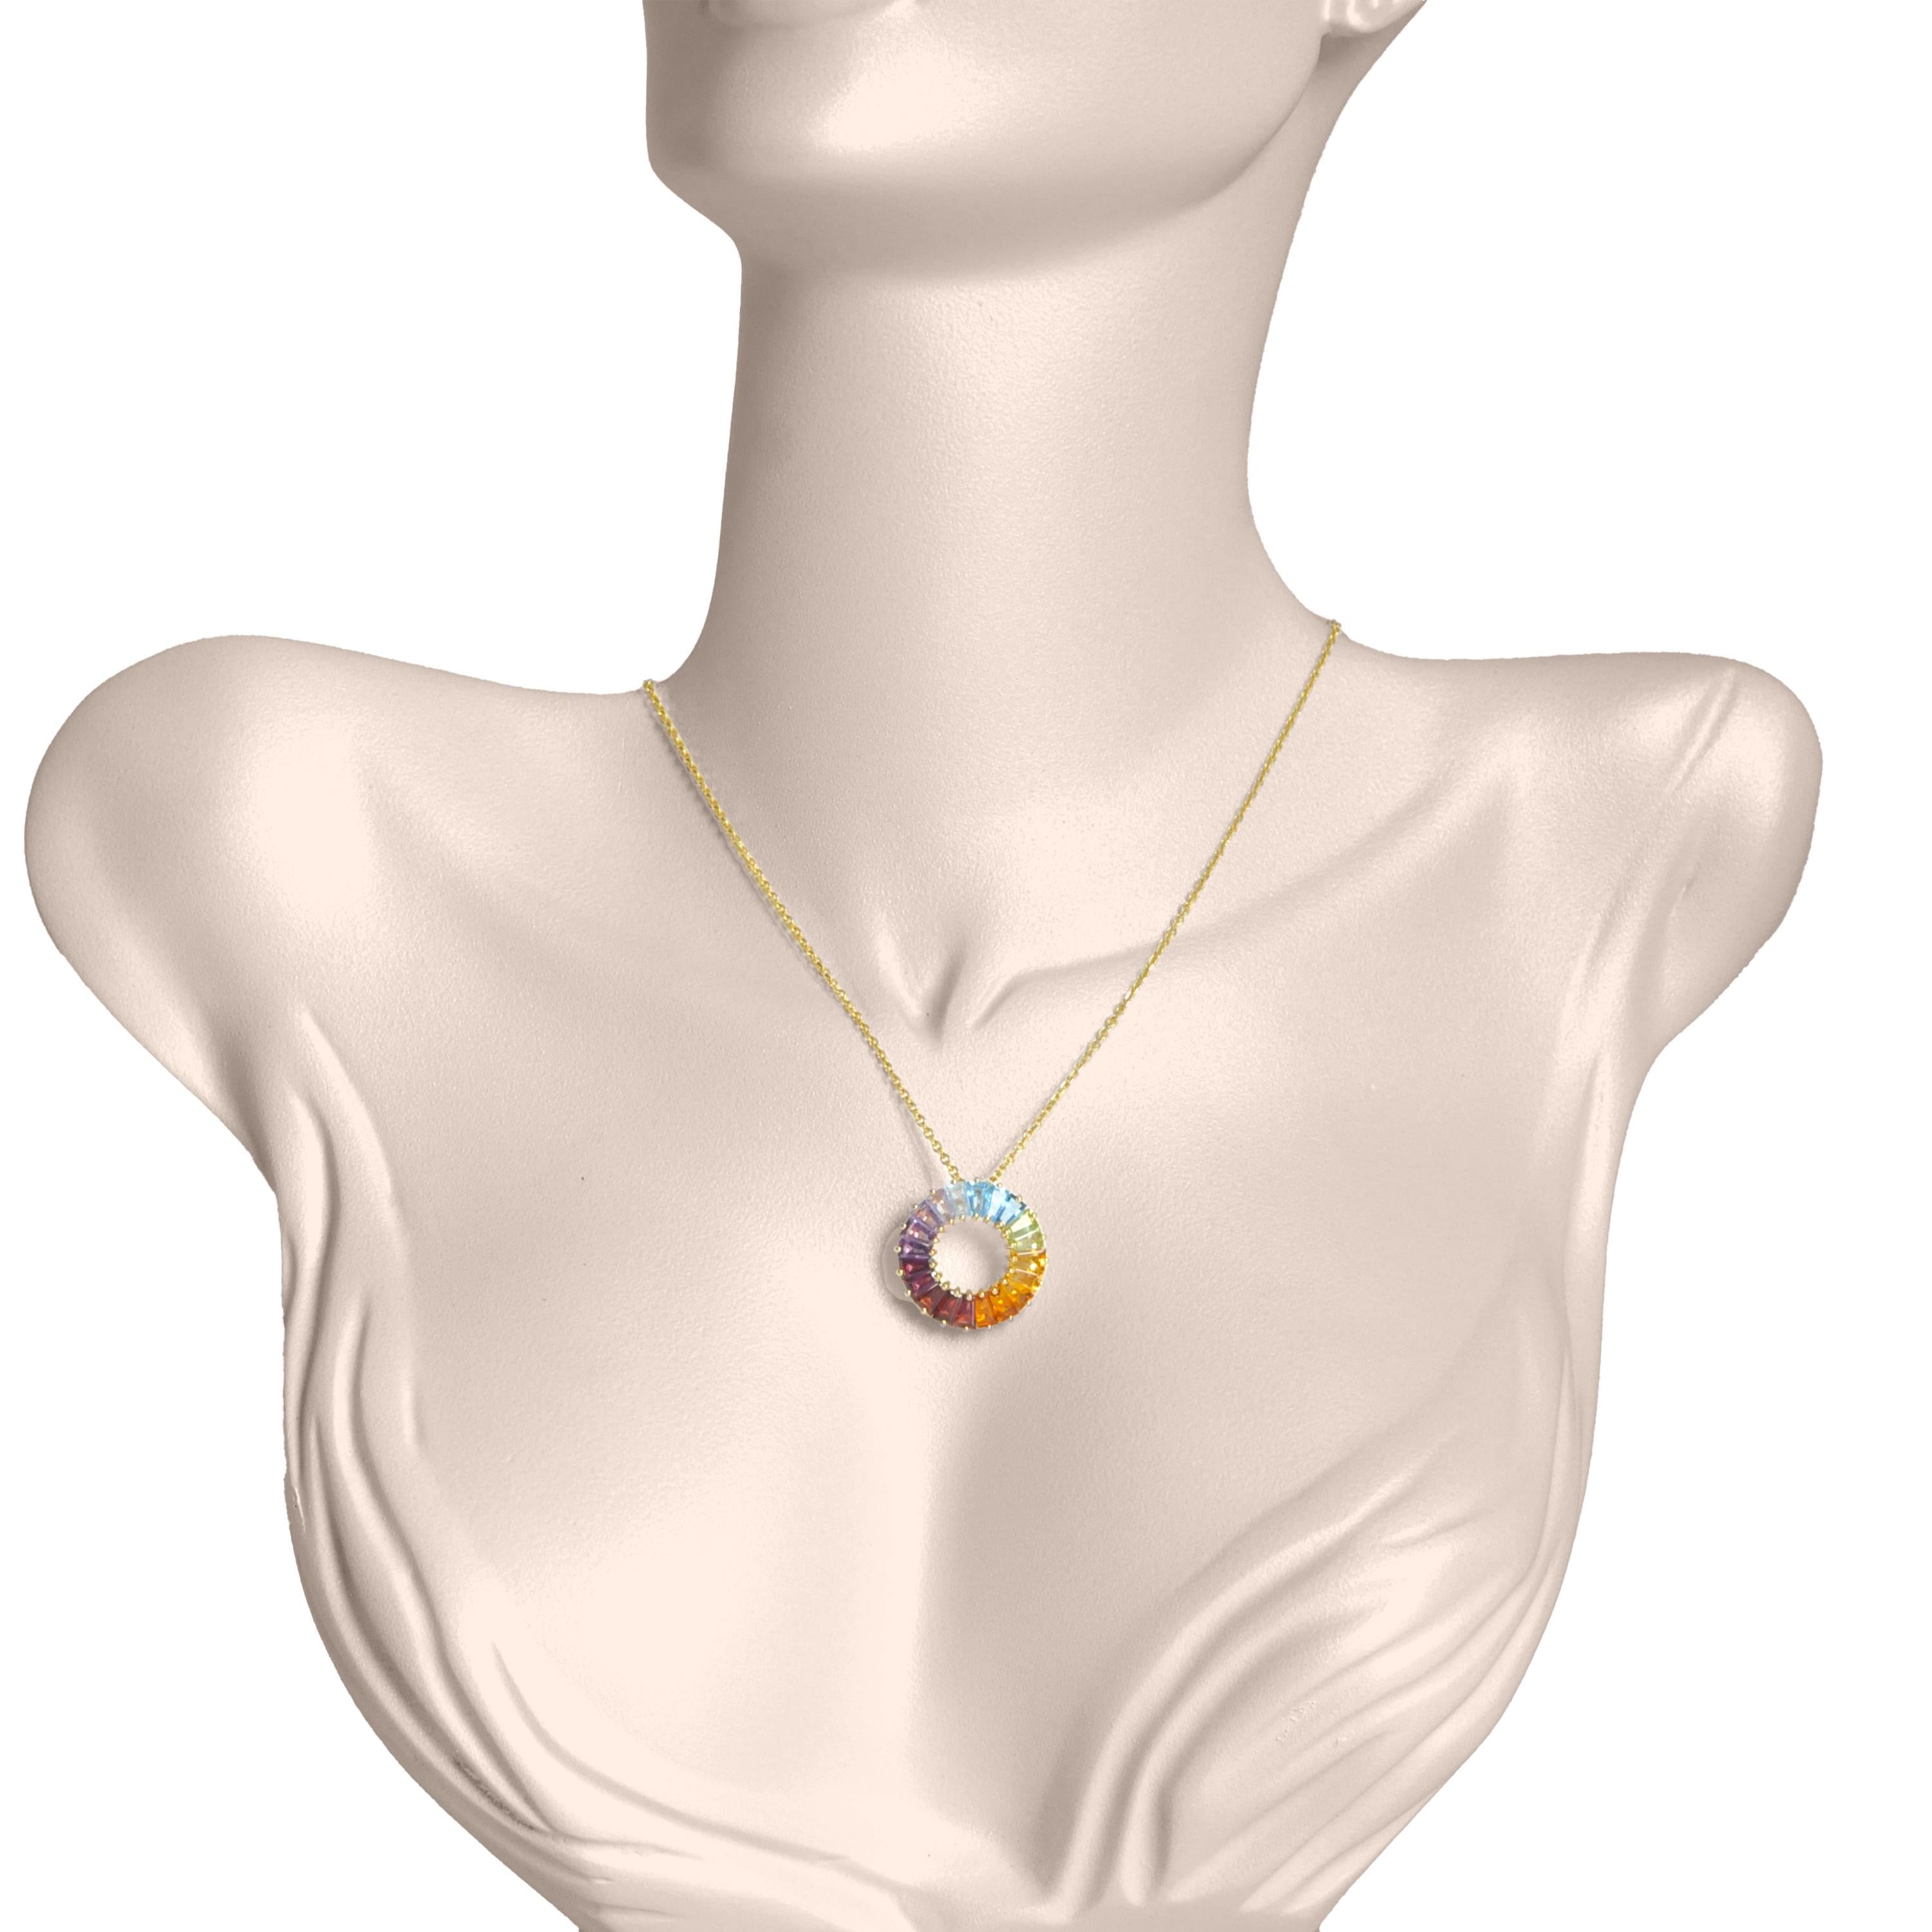 Introducing our exquisite 18K Gold Prong-Set Rainbow Gemstones Pendant Necklace, a vibrant celebration of nature's kaleidoscope. This necklace showcases a stunning pendant adorned with a rainbow of prong-set gemstones, each chosen for its vivid